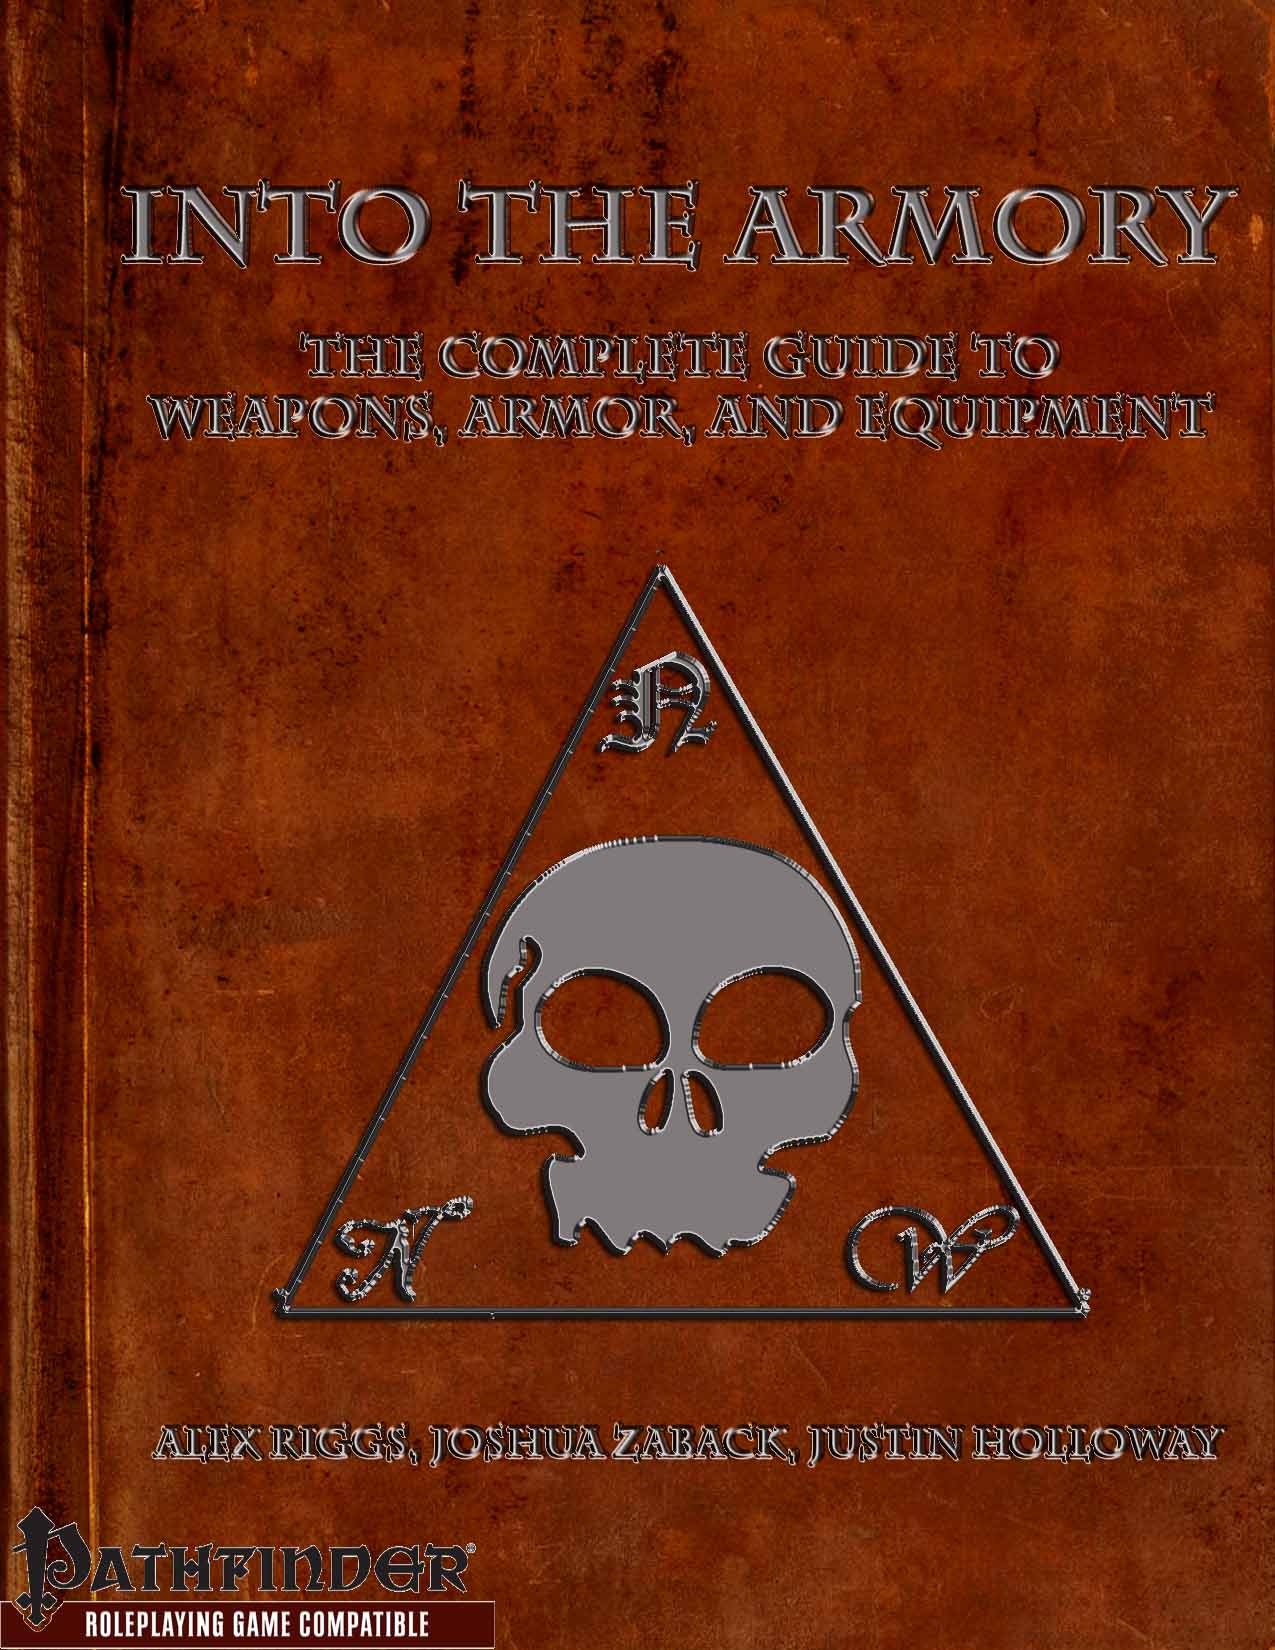 Into the Armory